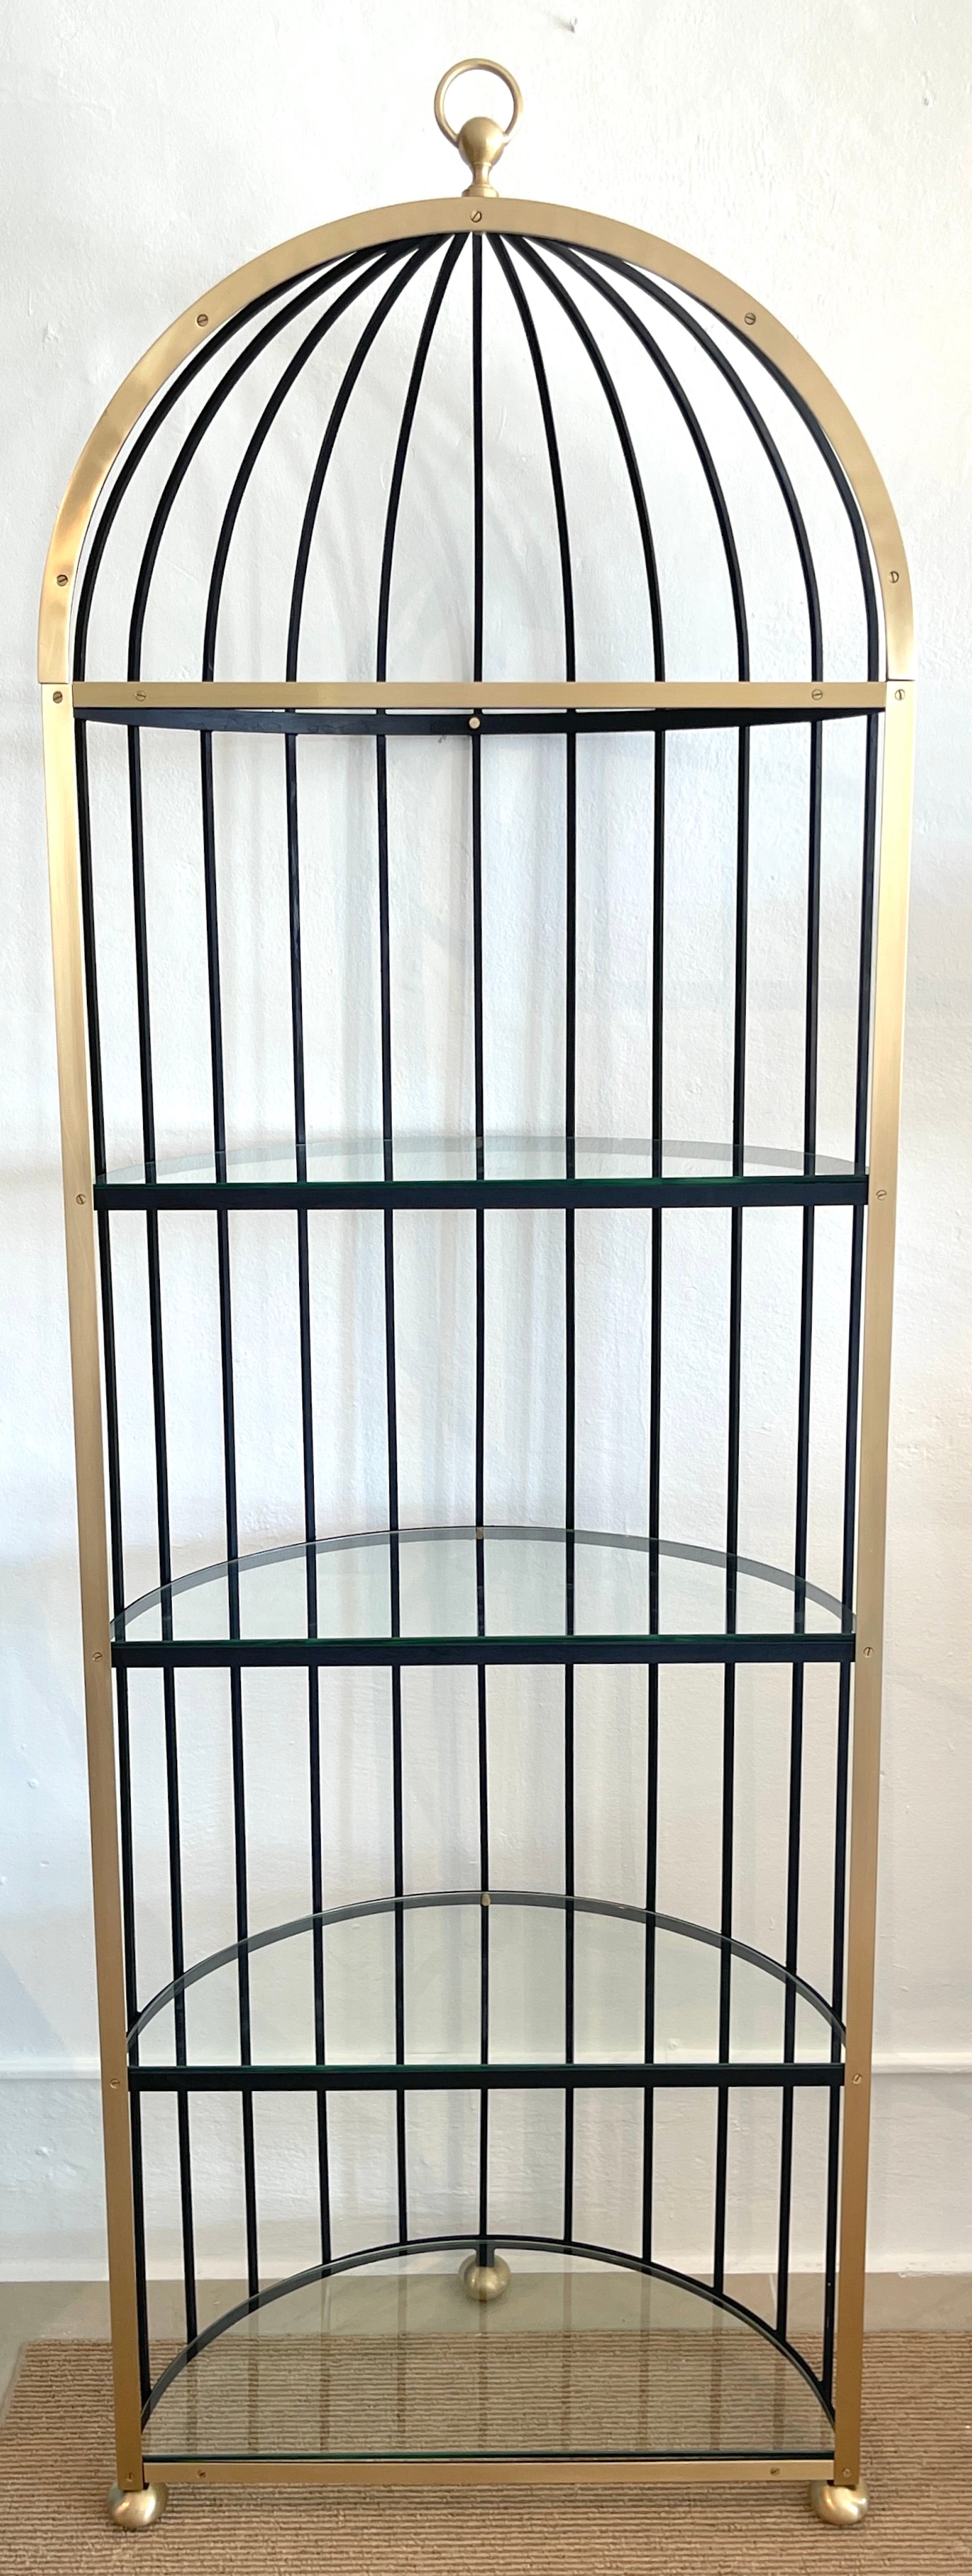 French Sculptural 'Brid Cage' Motif Brass and Iron Étagère/ Shelf -Restored
France, Circa 1970s

A standout, French modern brass and iron etagere, showing influences of whimsy and Surrealism. Depicting a half model of a birdcage, with brass